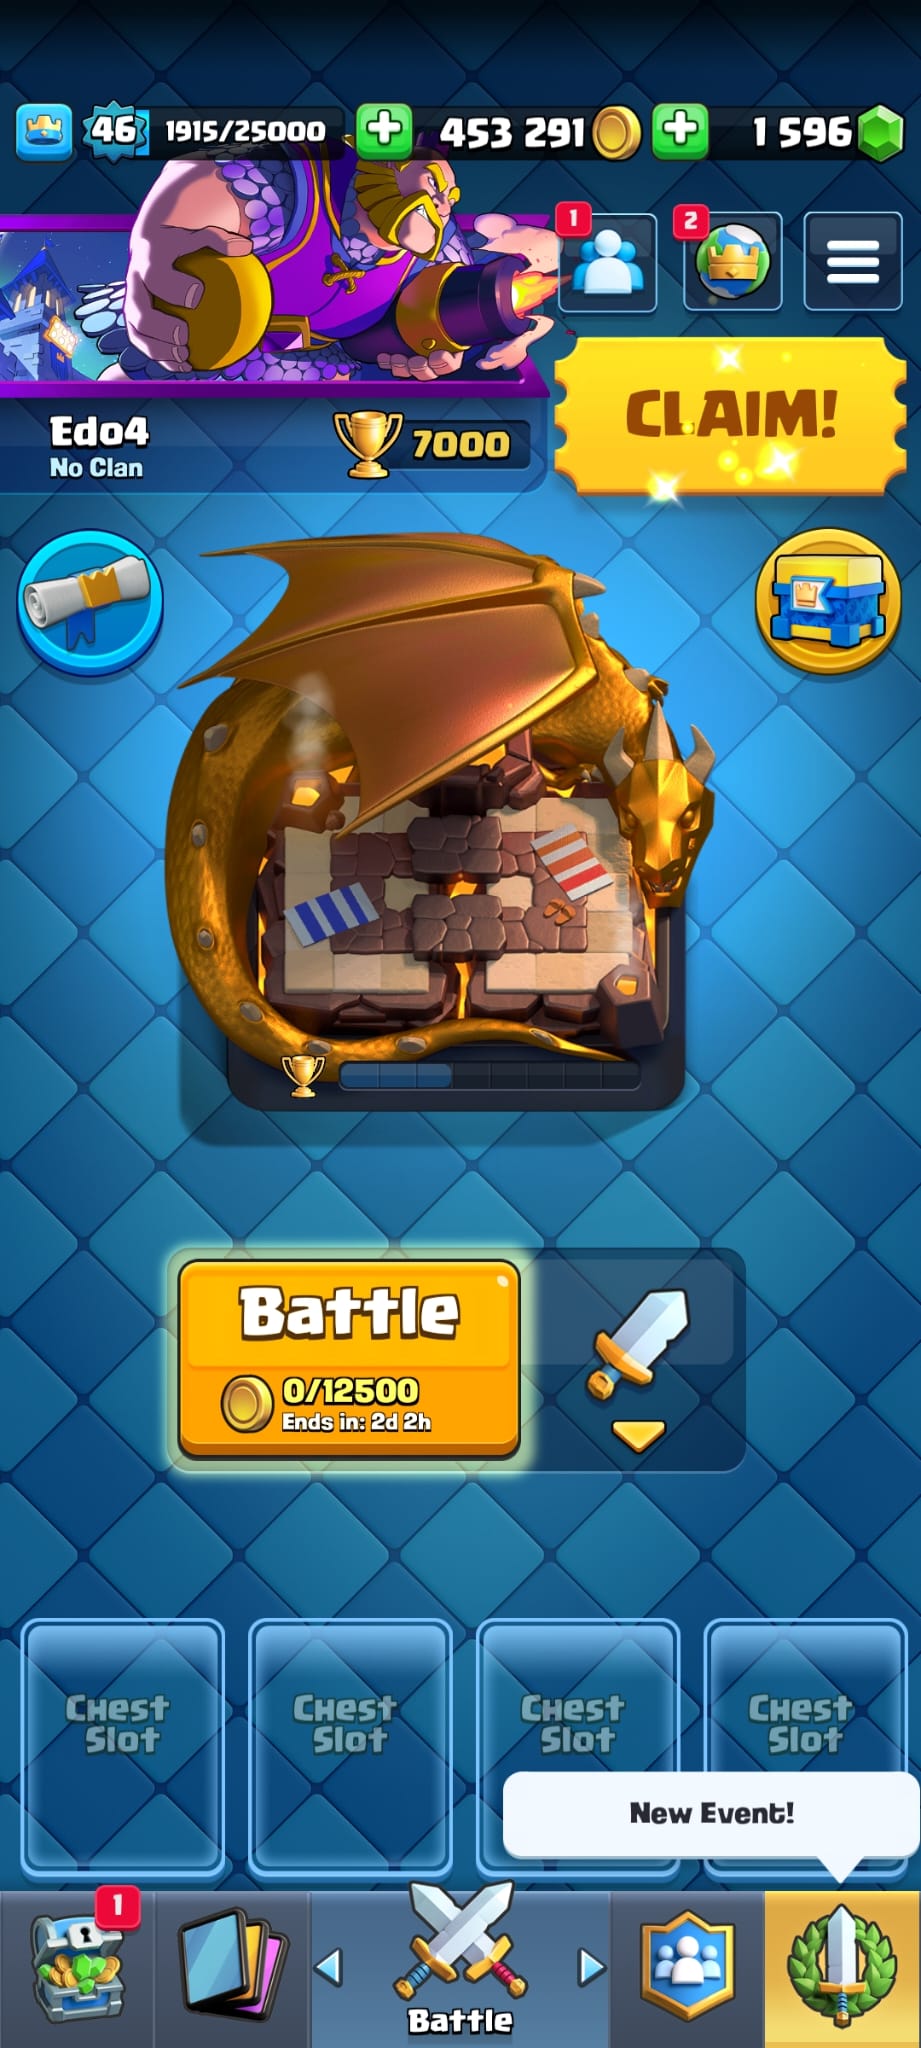 #crafty [Code 3003] Level 46 / 27 Card Max + 6 Skins Towers / Very Rare 